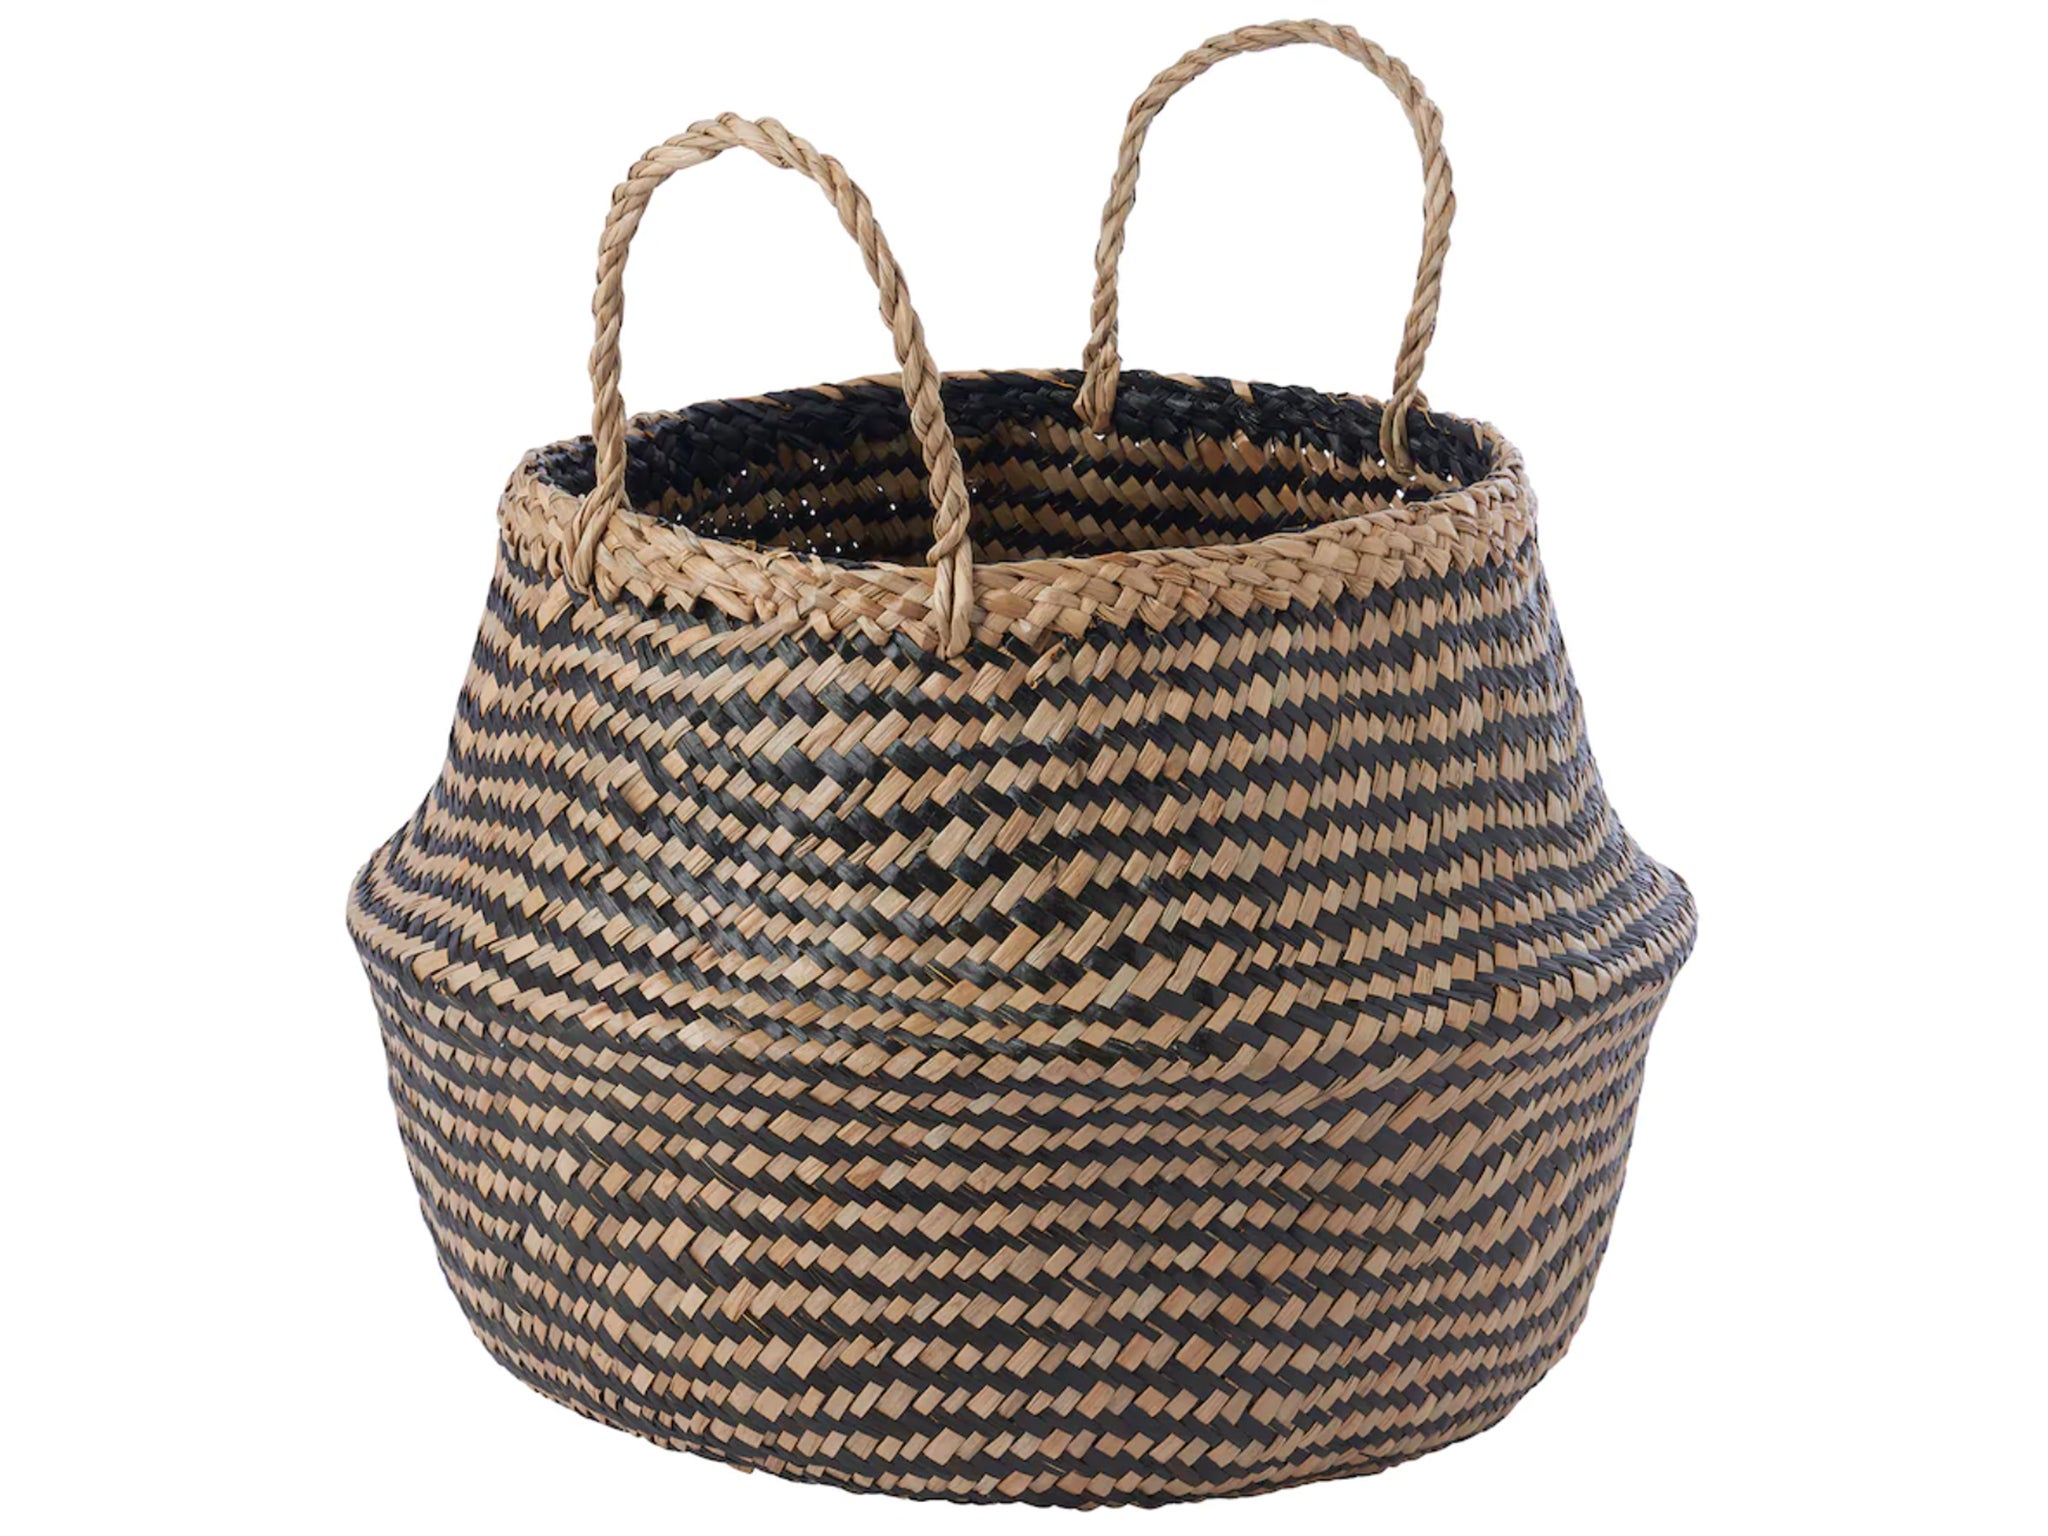 A braided basket means you can keep your space tidy while making the most of any floor space